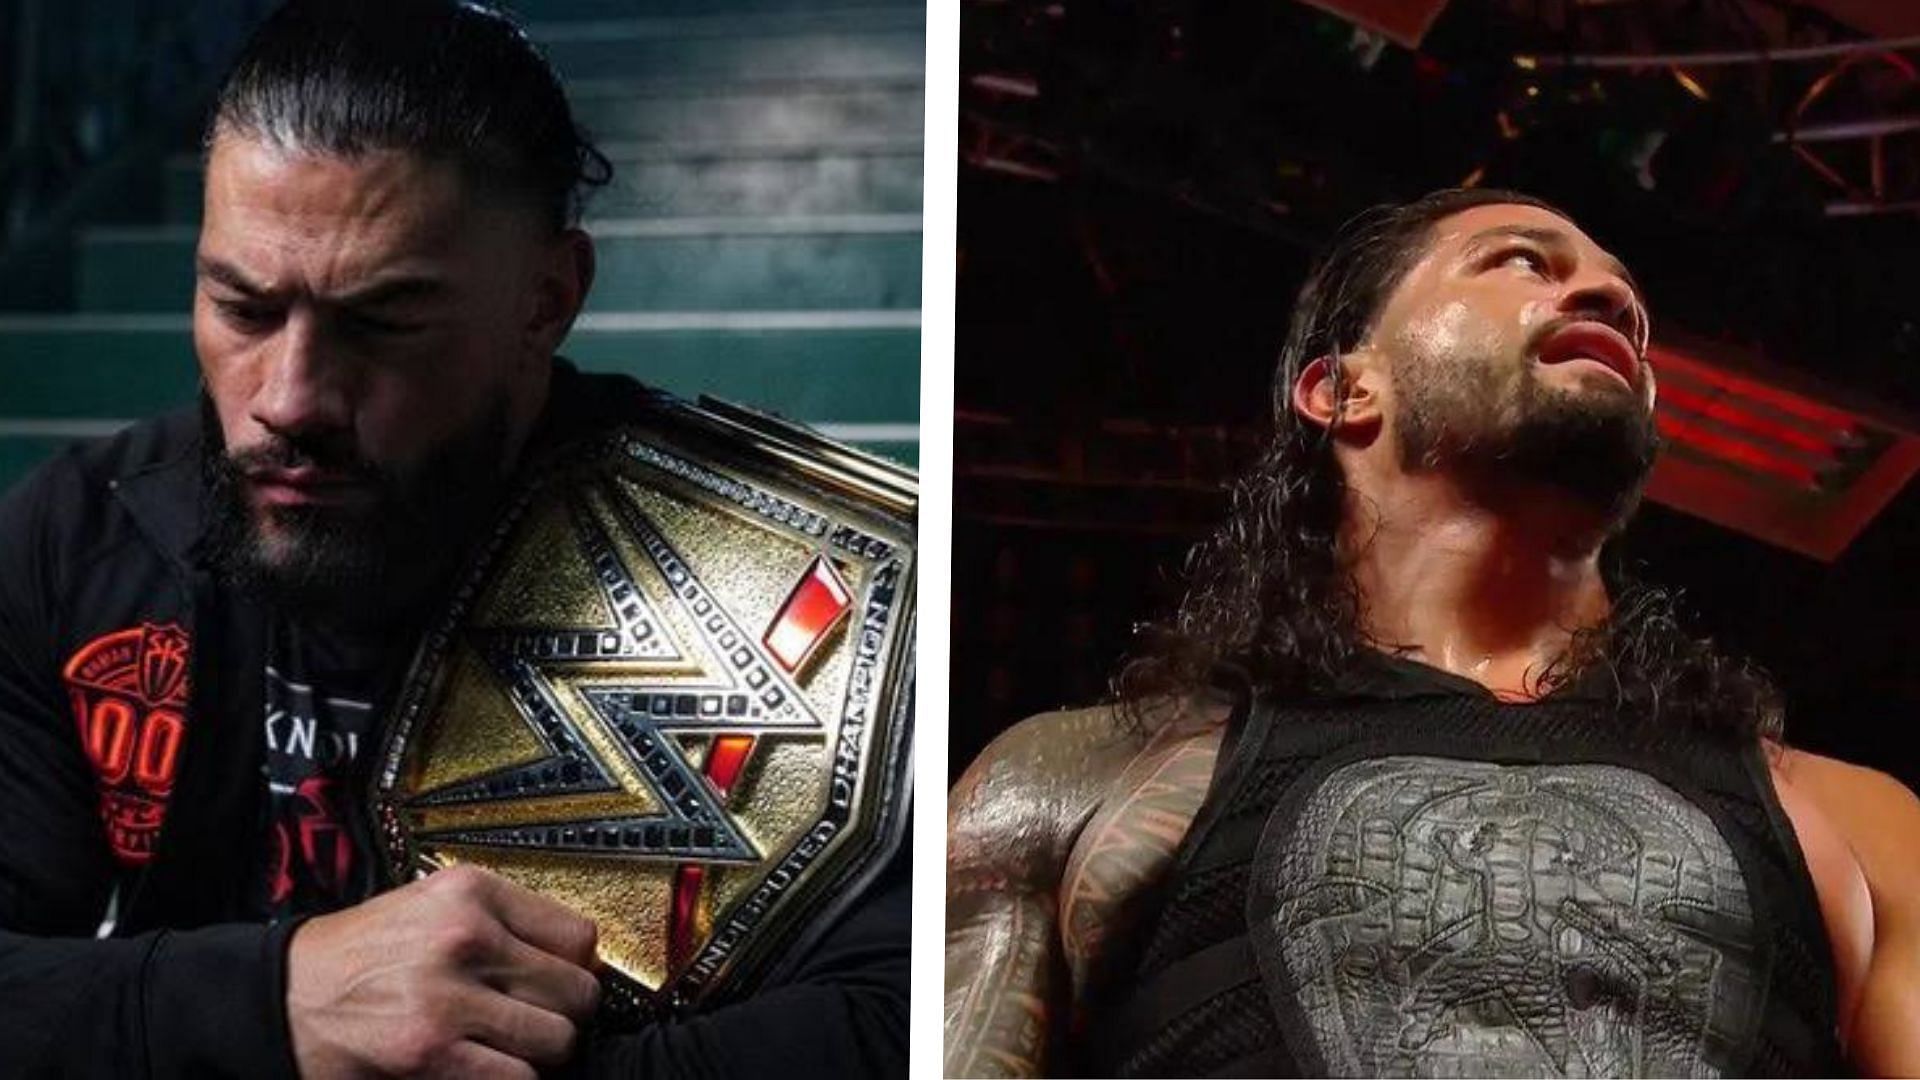 Roman Reigns had a rocky journey as a WWE Champion